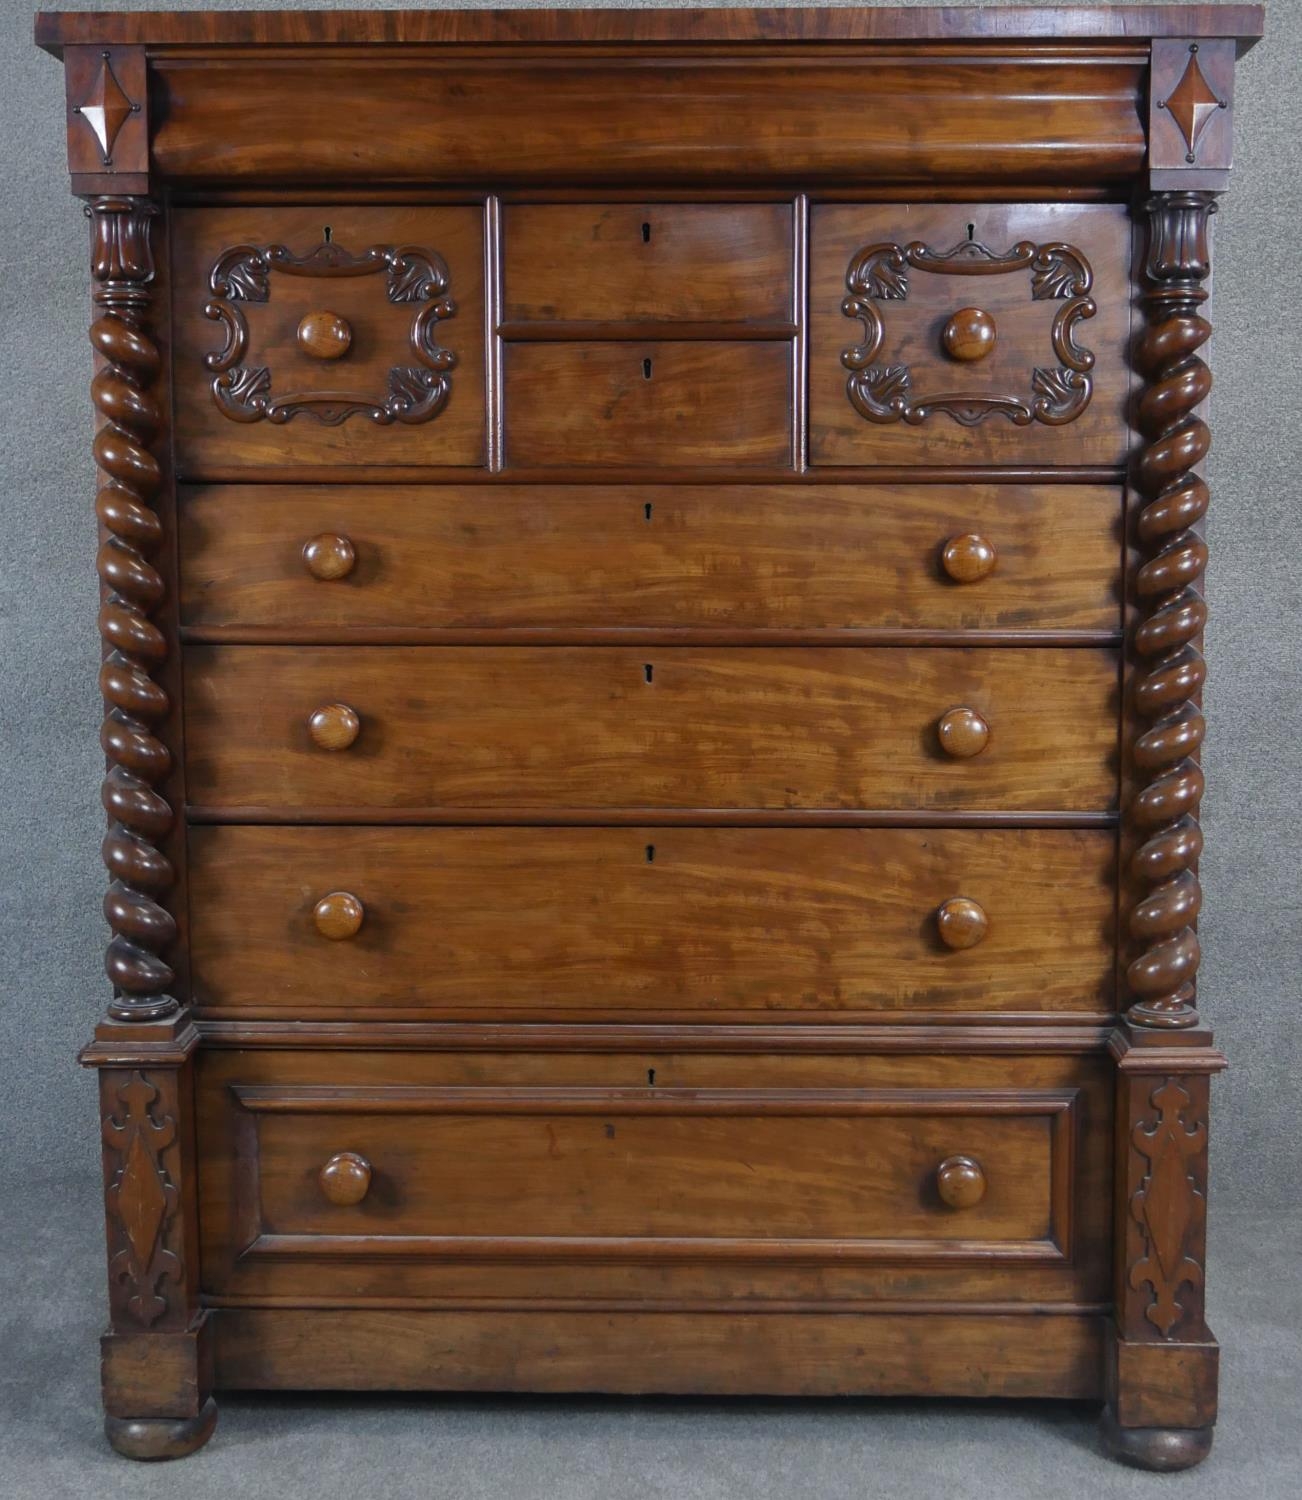 A 19th century mahogany Scottish chest of drawers with and arrangement of drawers flanked by